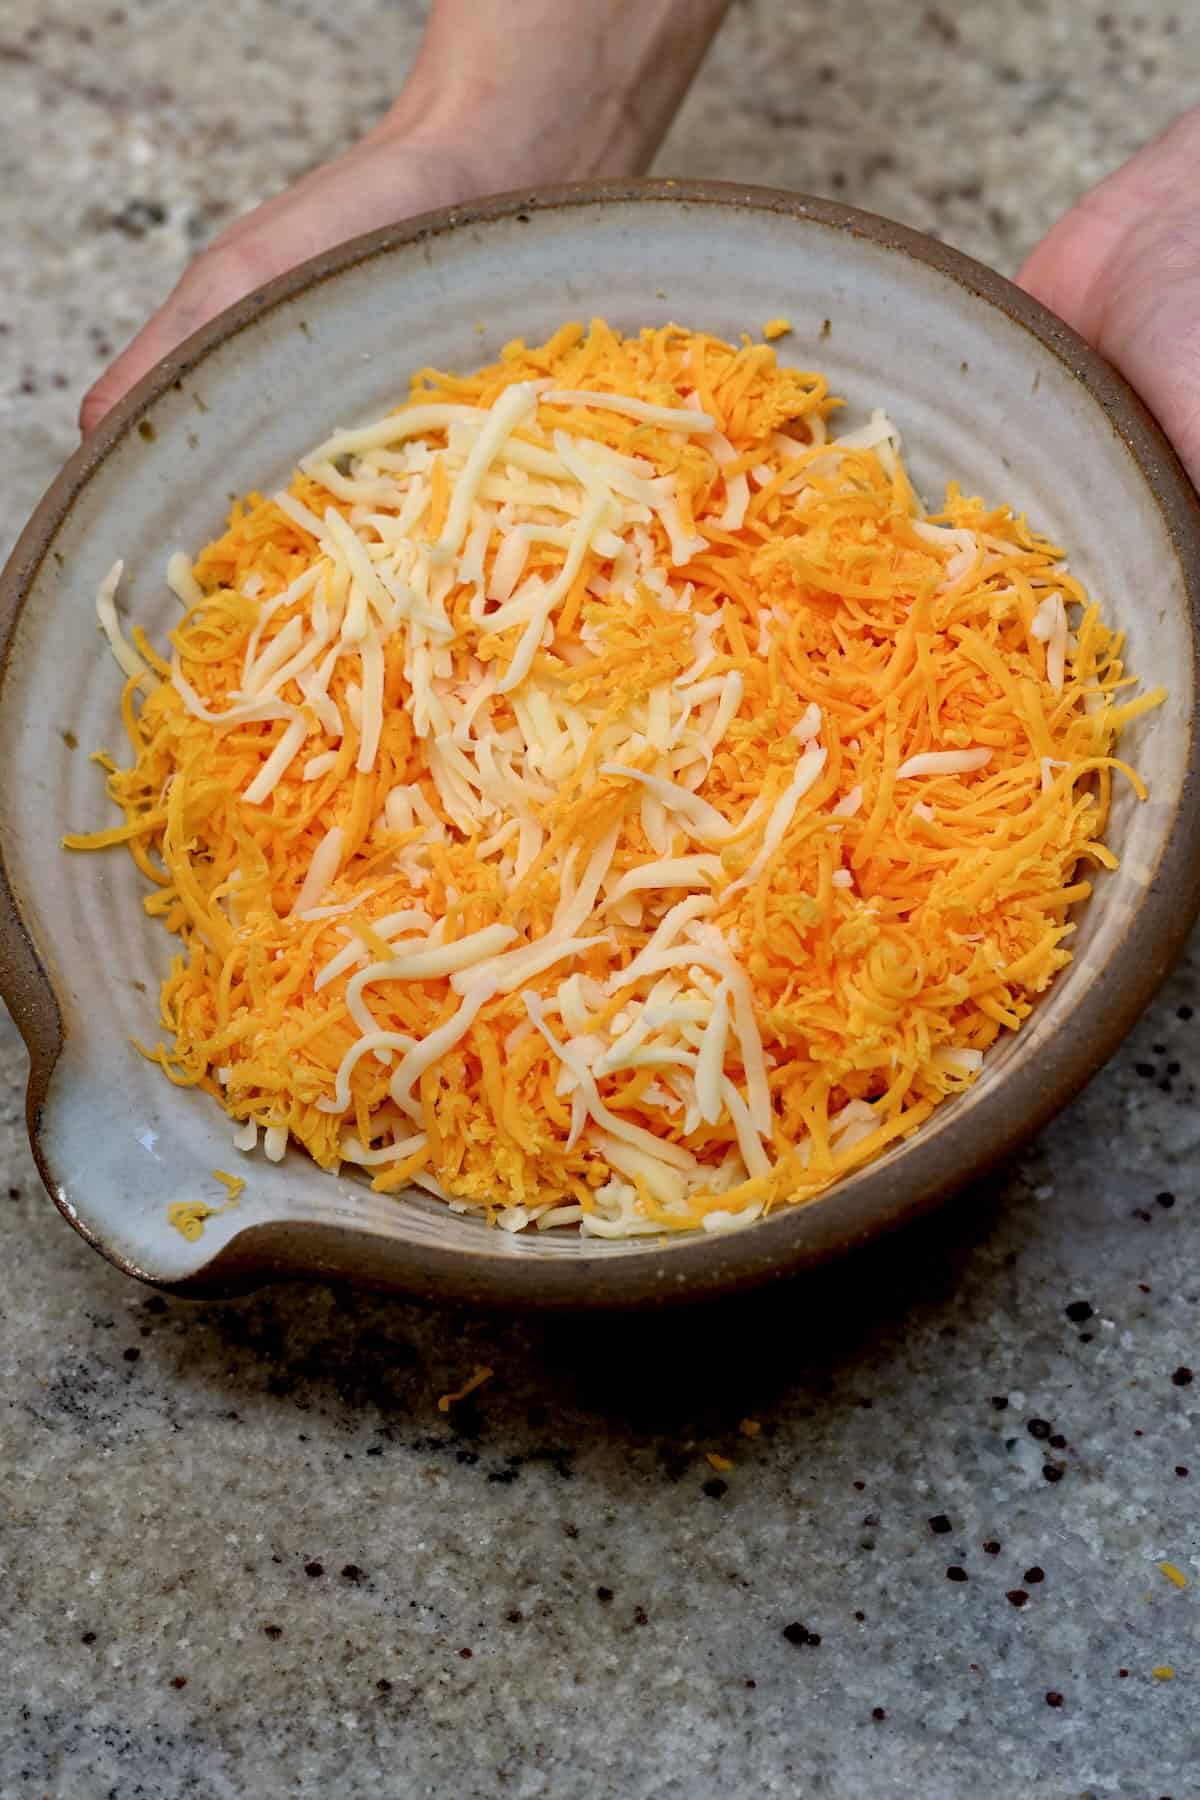 Shredded cheese in a bowl